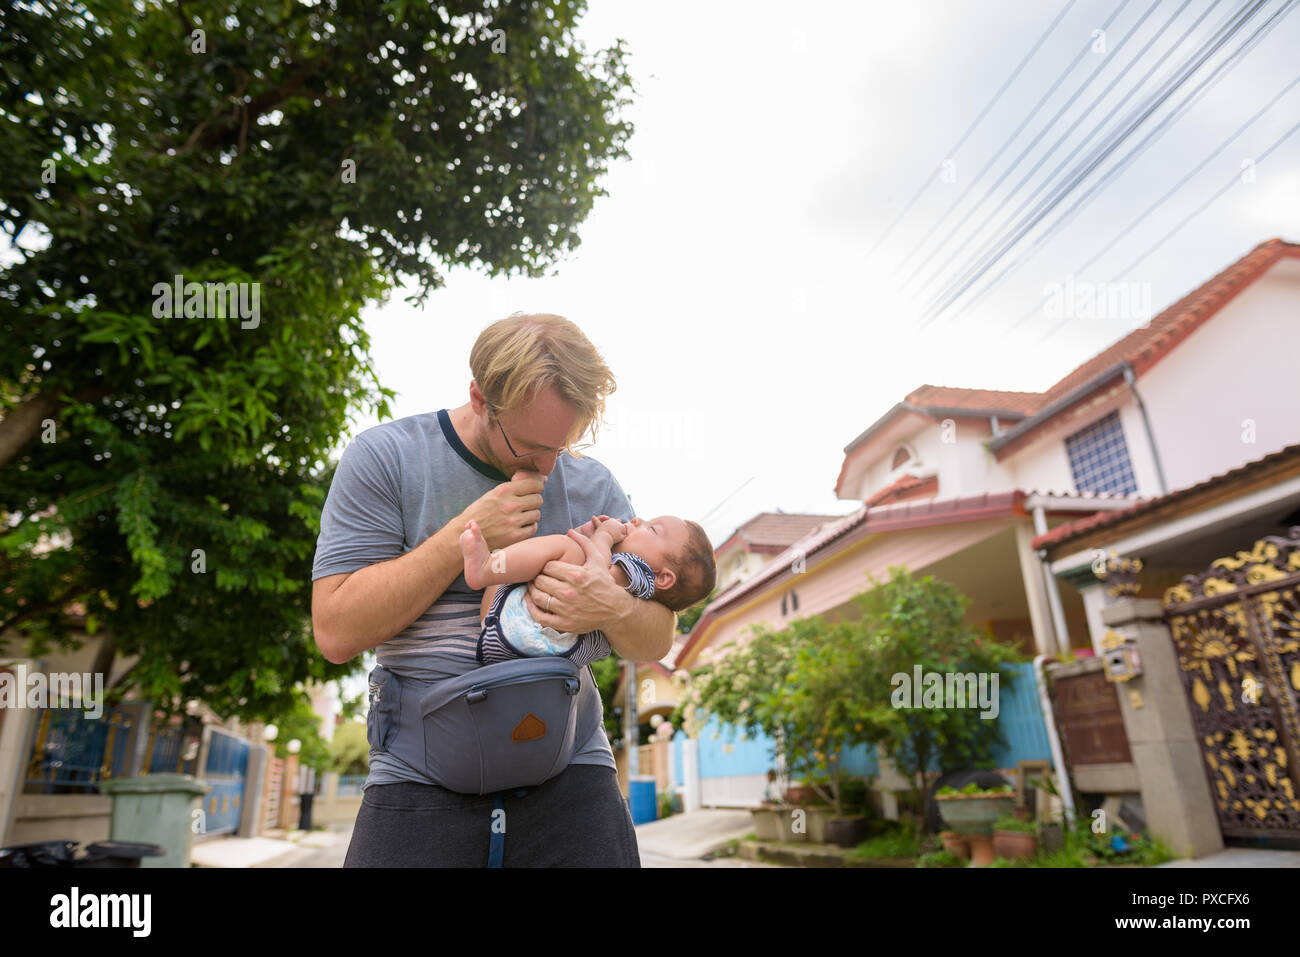 Father and baby son bonding together at home outdoors Stock Photo